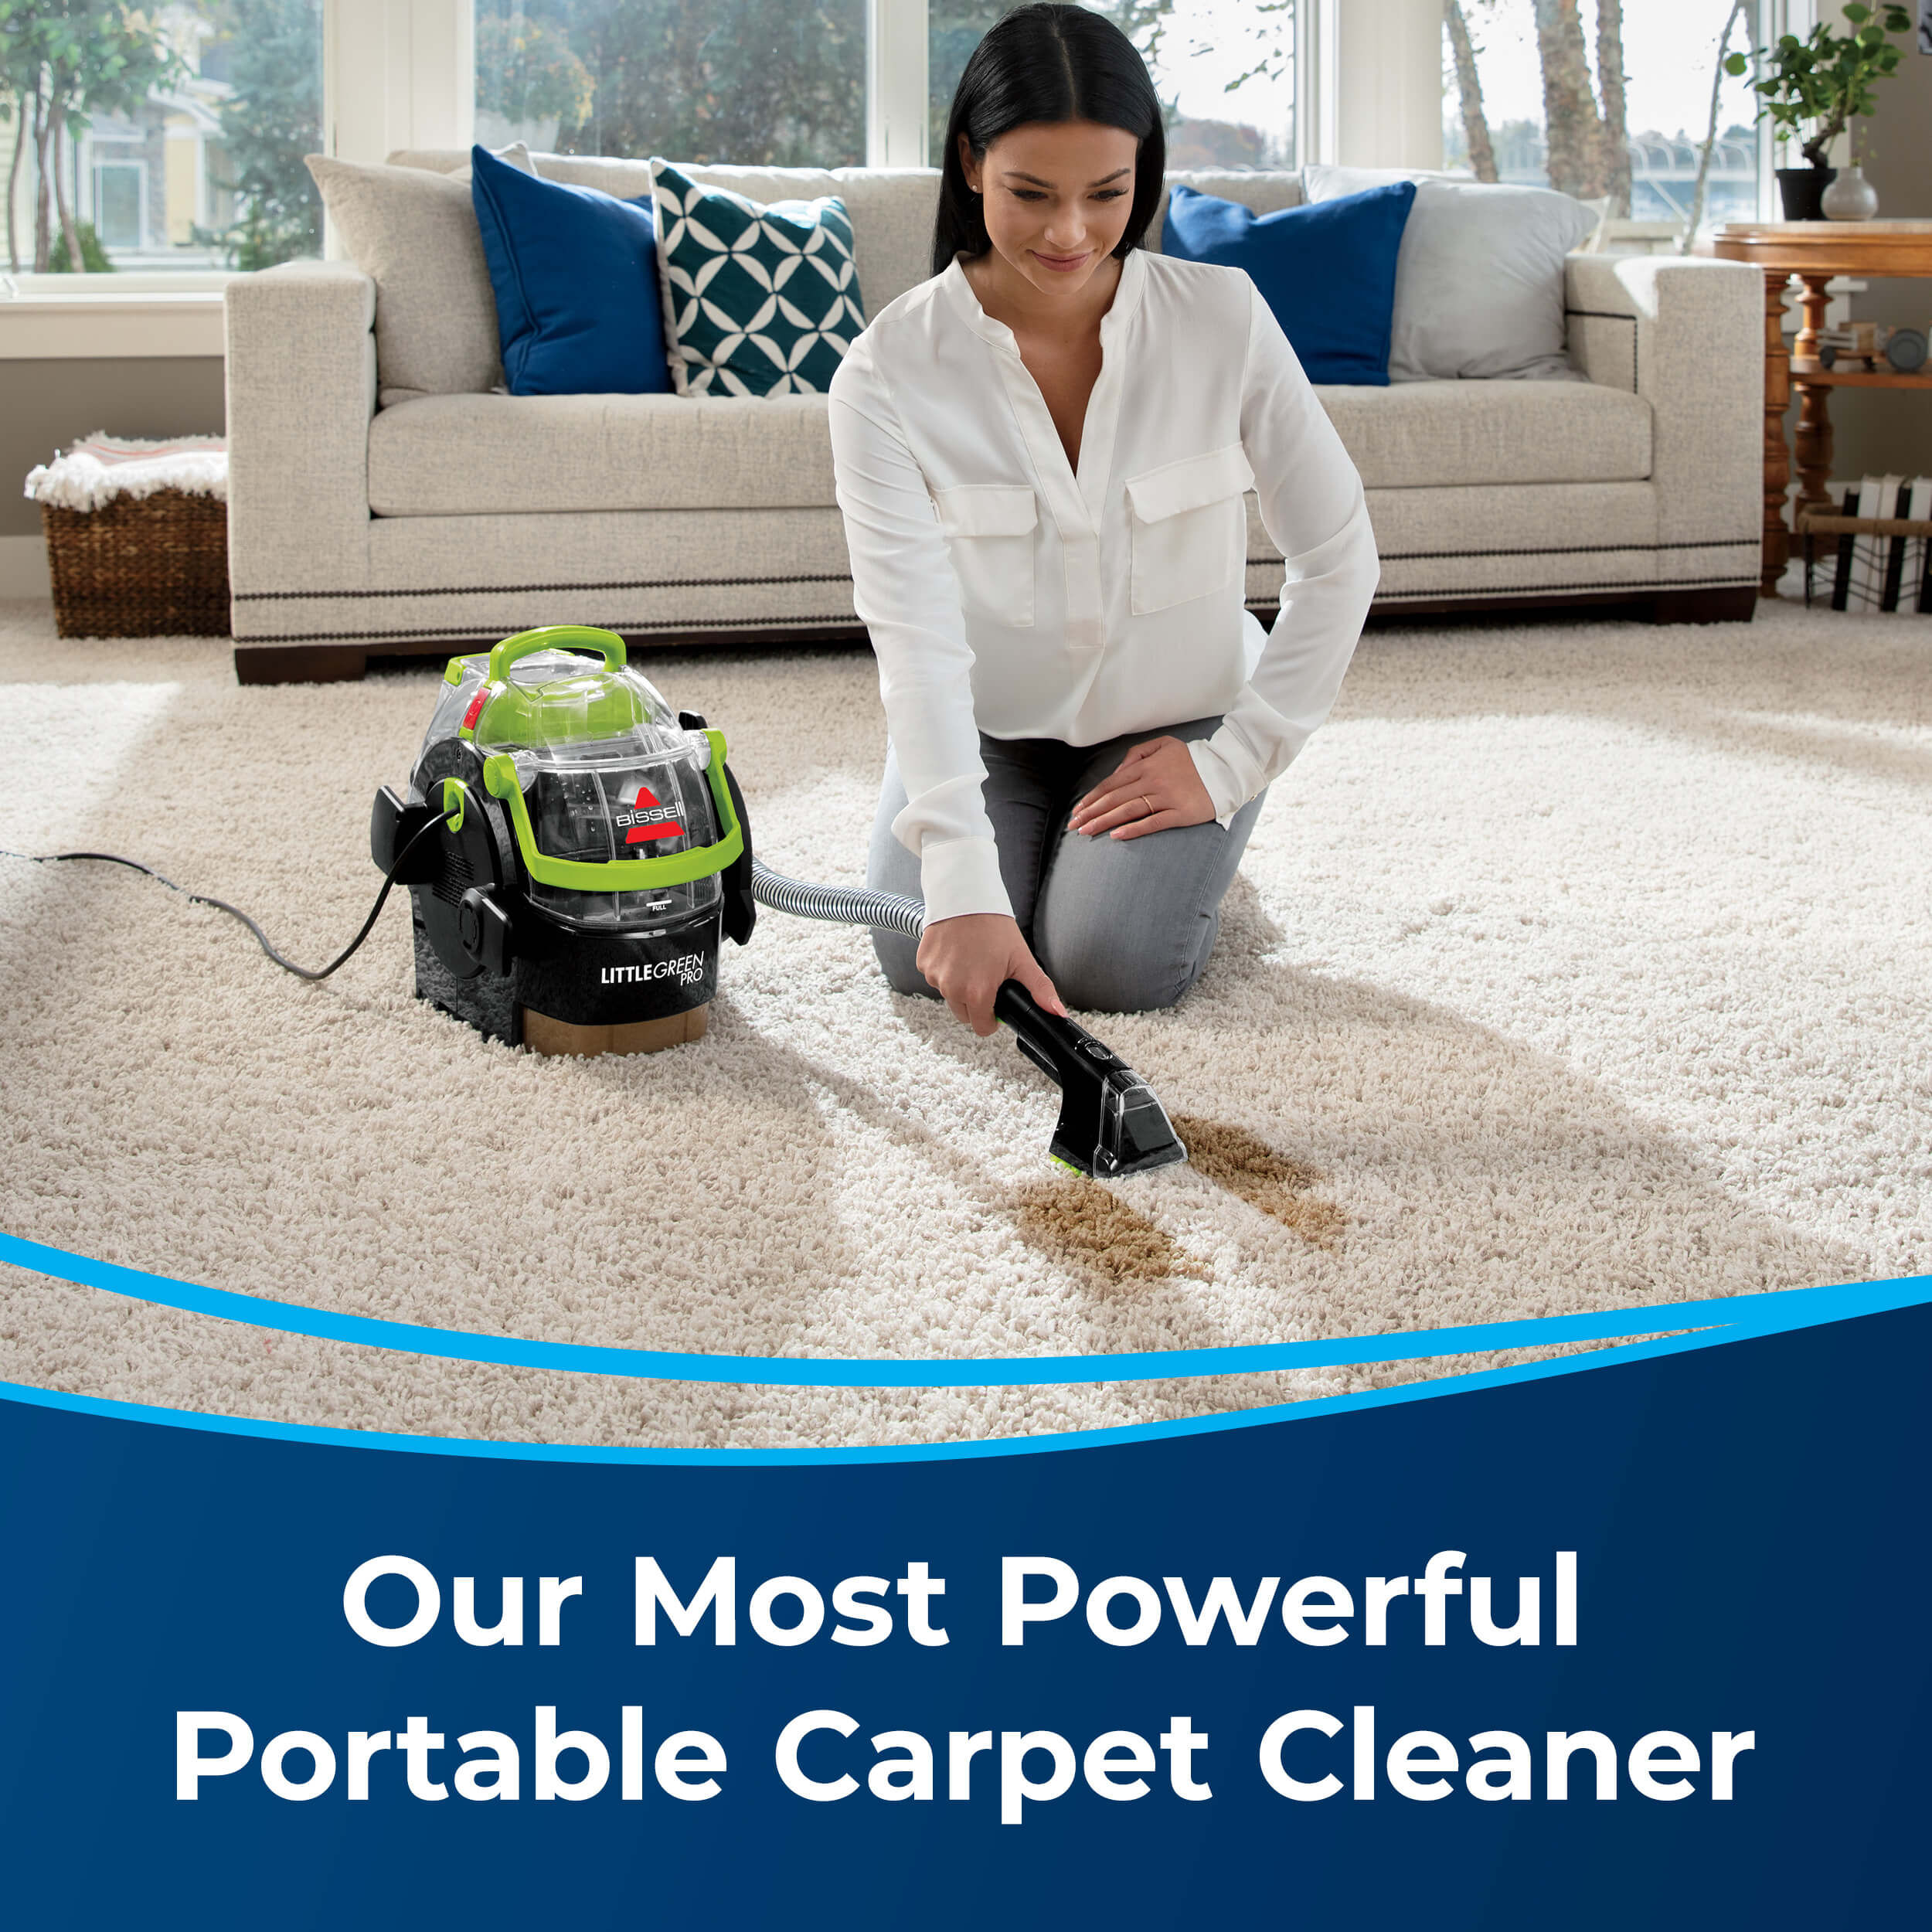 BISSELL Little Green Pro Portable Carpet Cleaner 2505